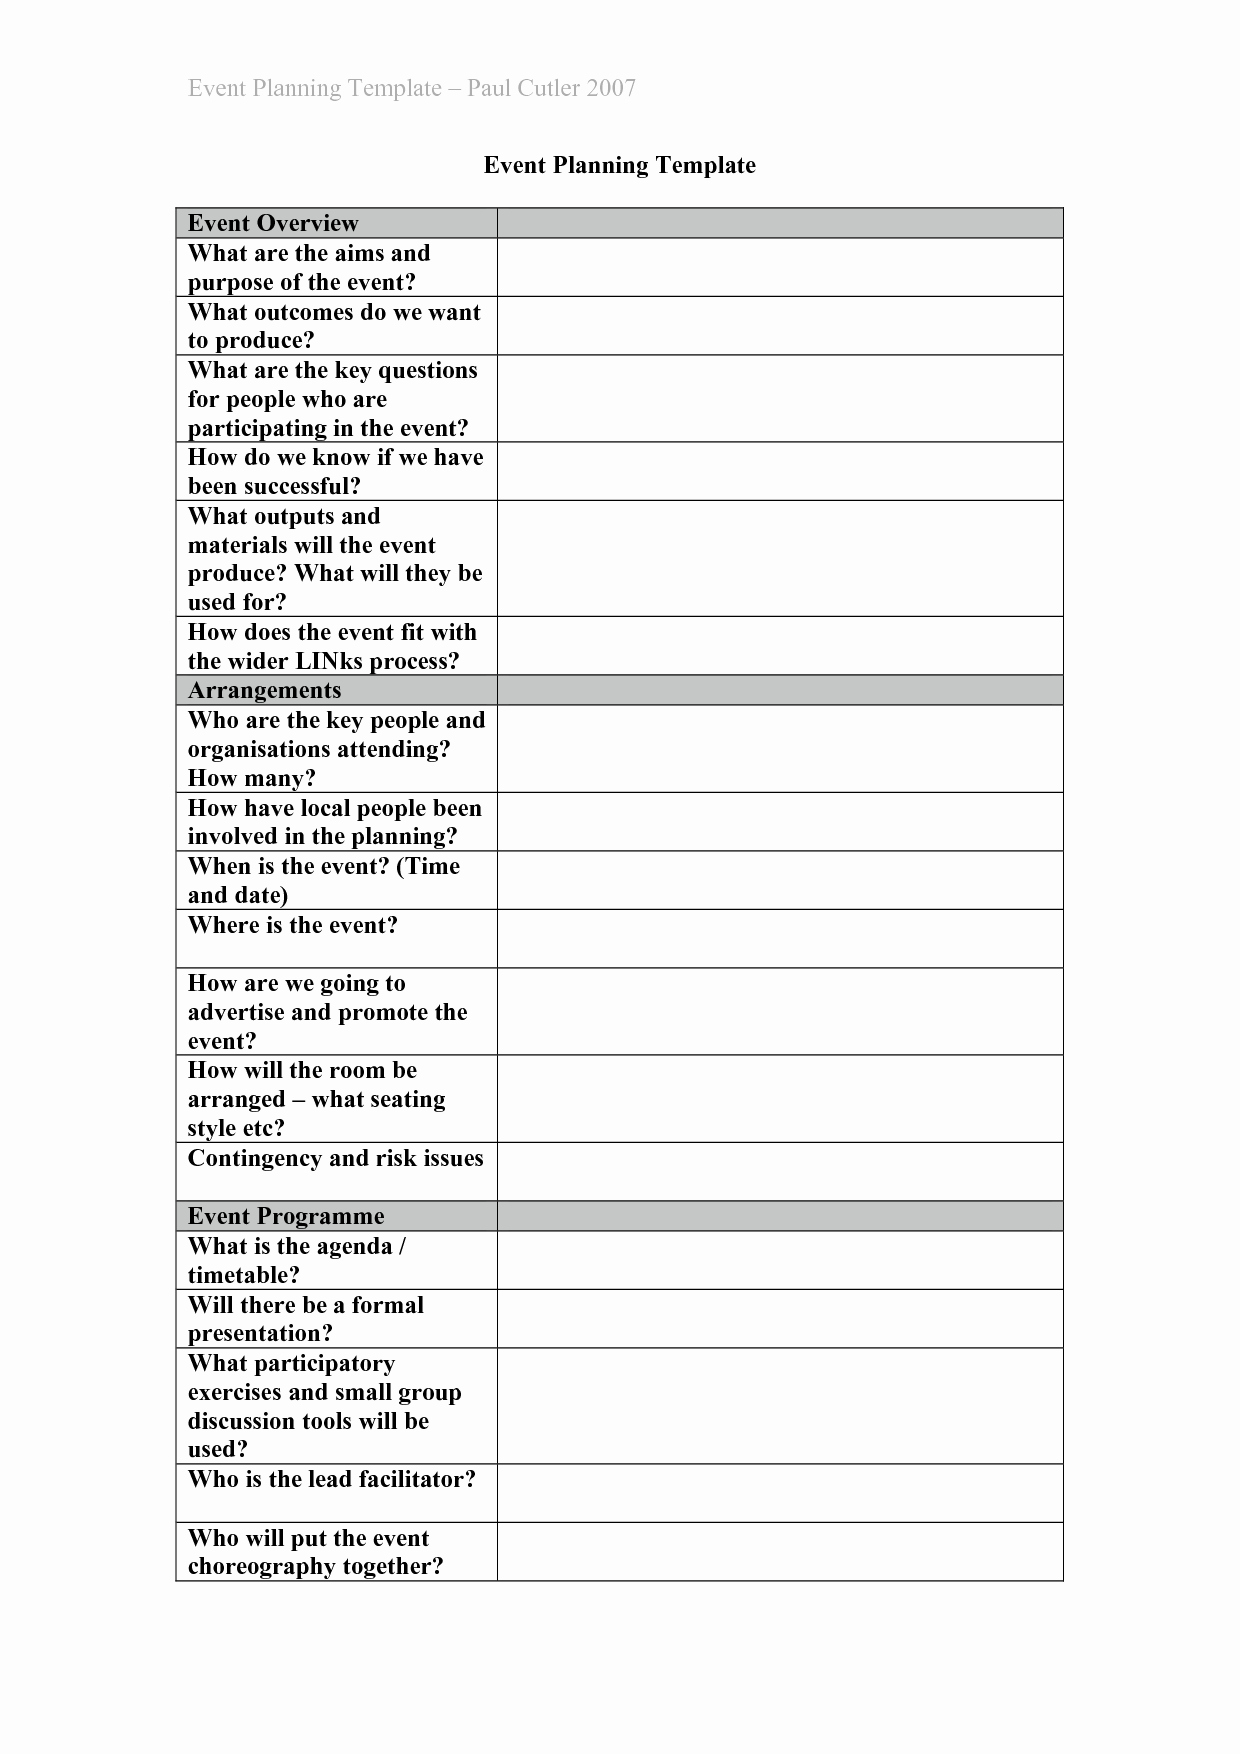 Event Planning form Template New event Planning forms Templates 8 Invest Wight